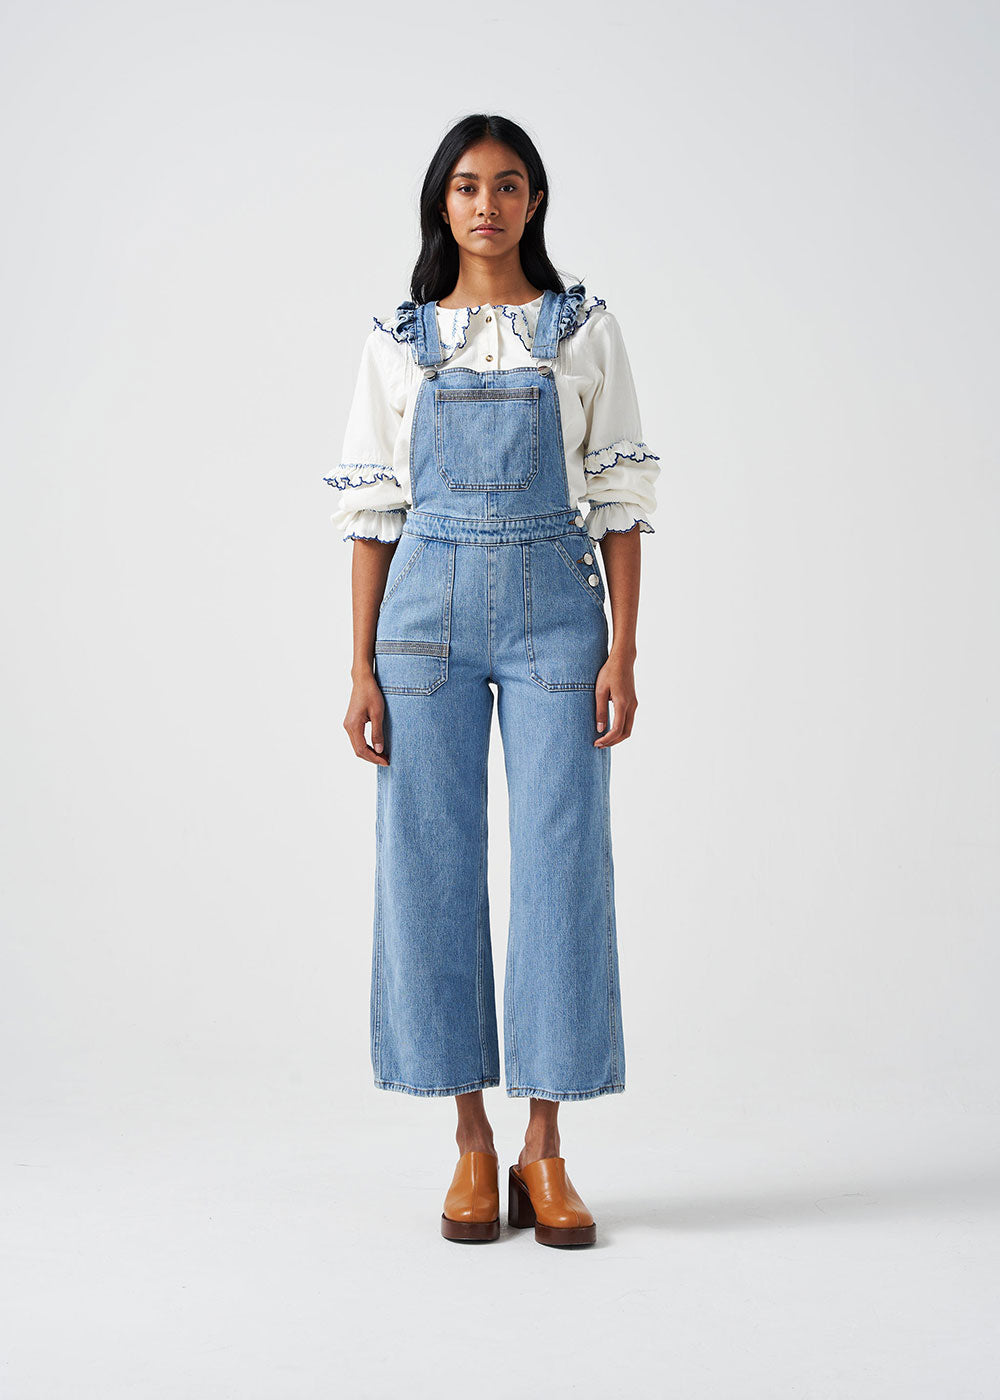 SEVENTY + MOCHI Elodie Frill Overalls - Rodeo Vintage